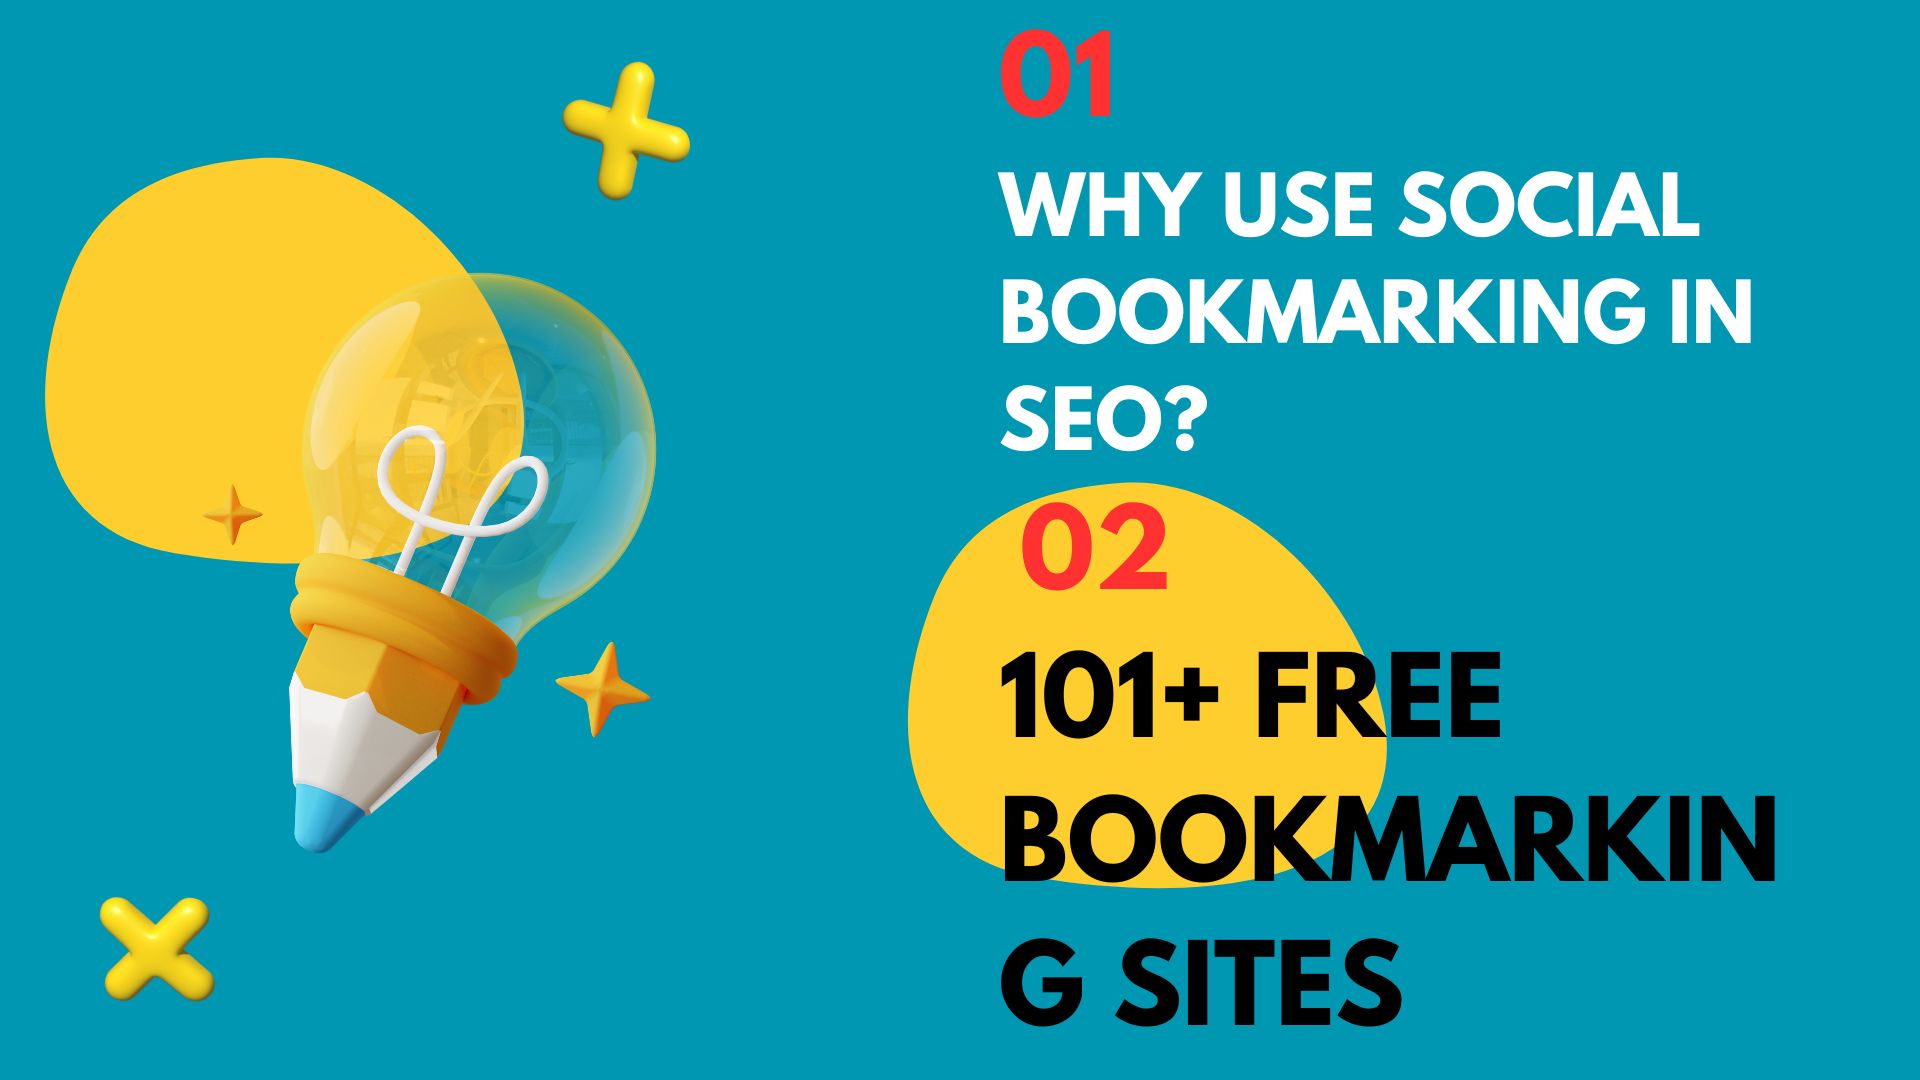 Why use social bookmarking in SEO 101+ Free bookmarking sites